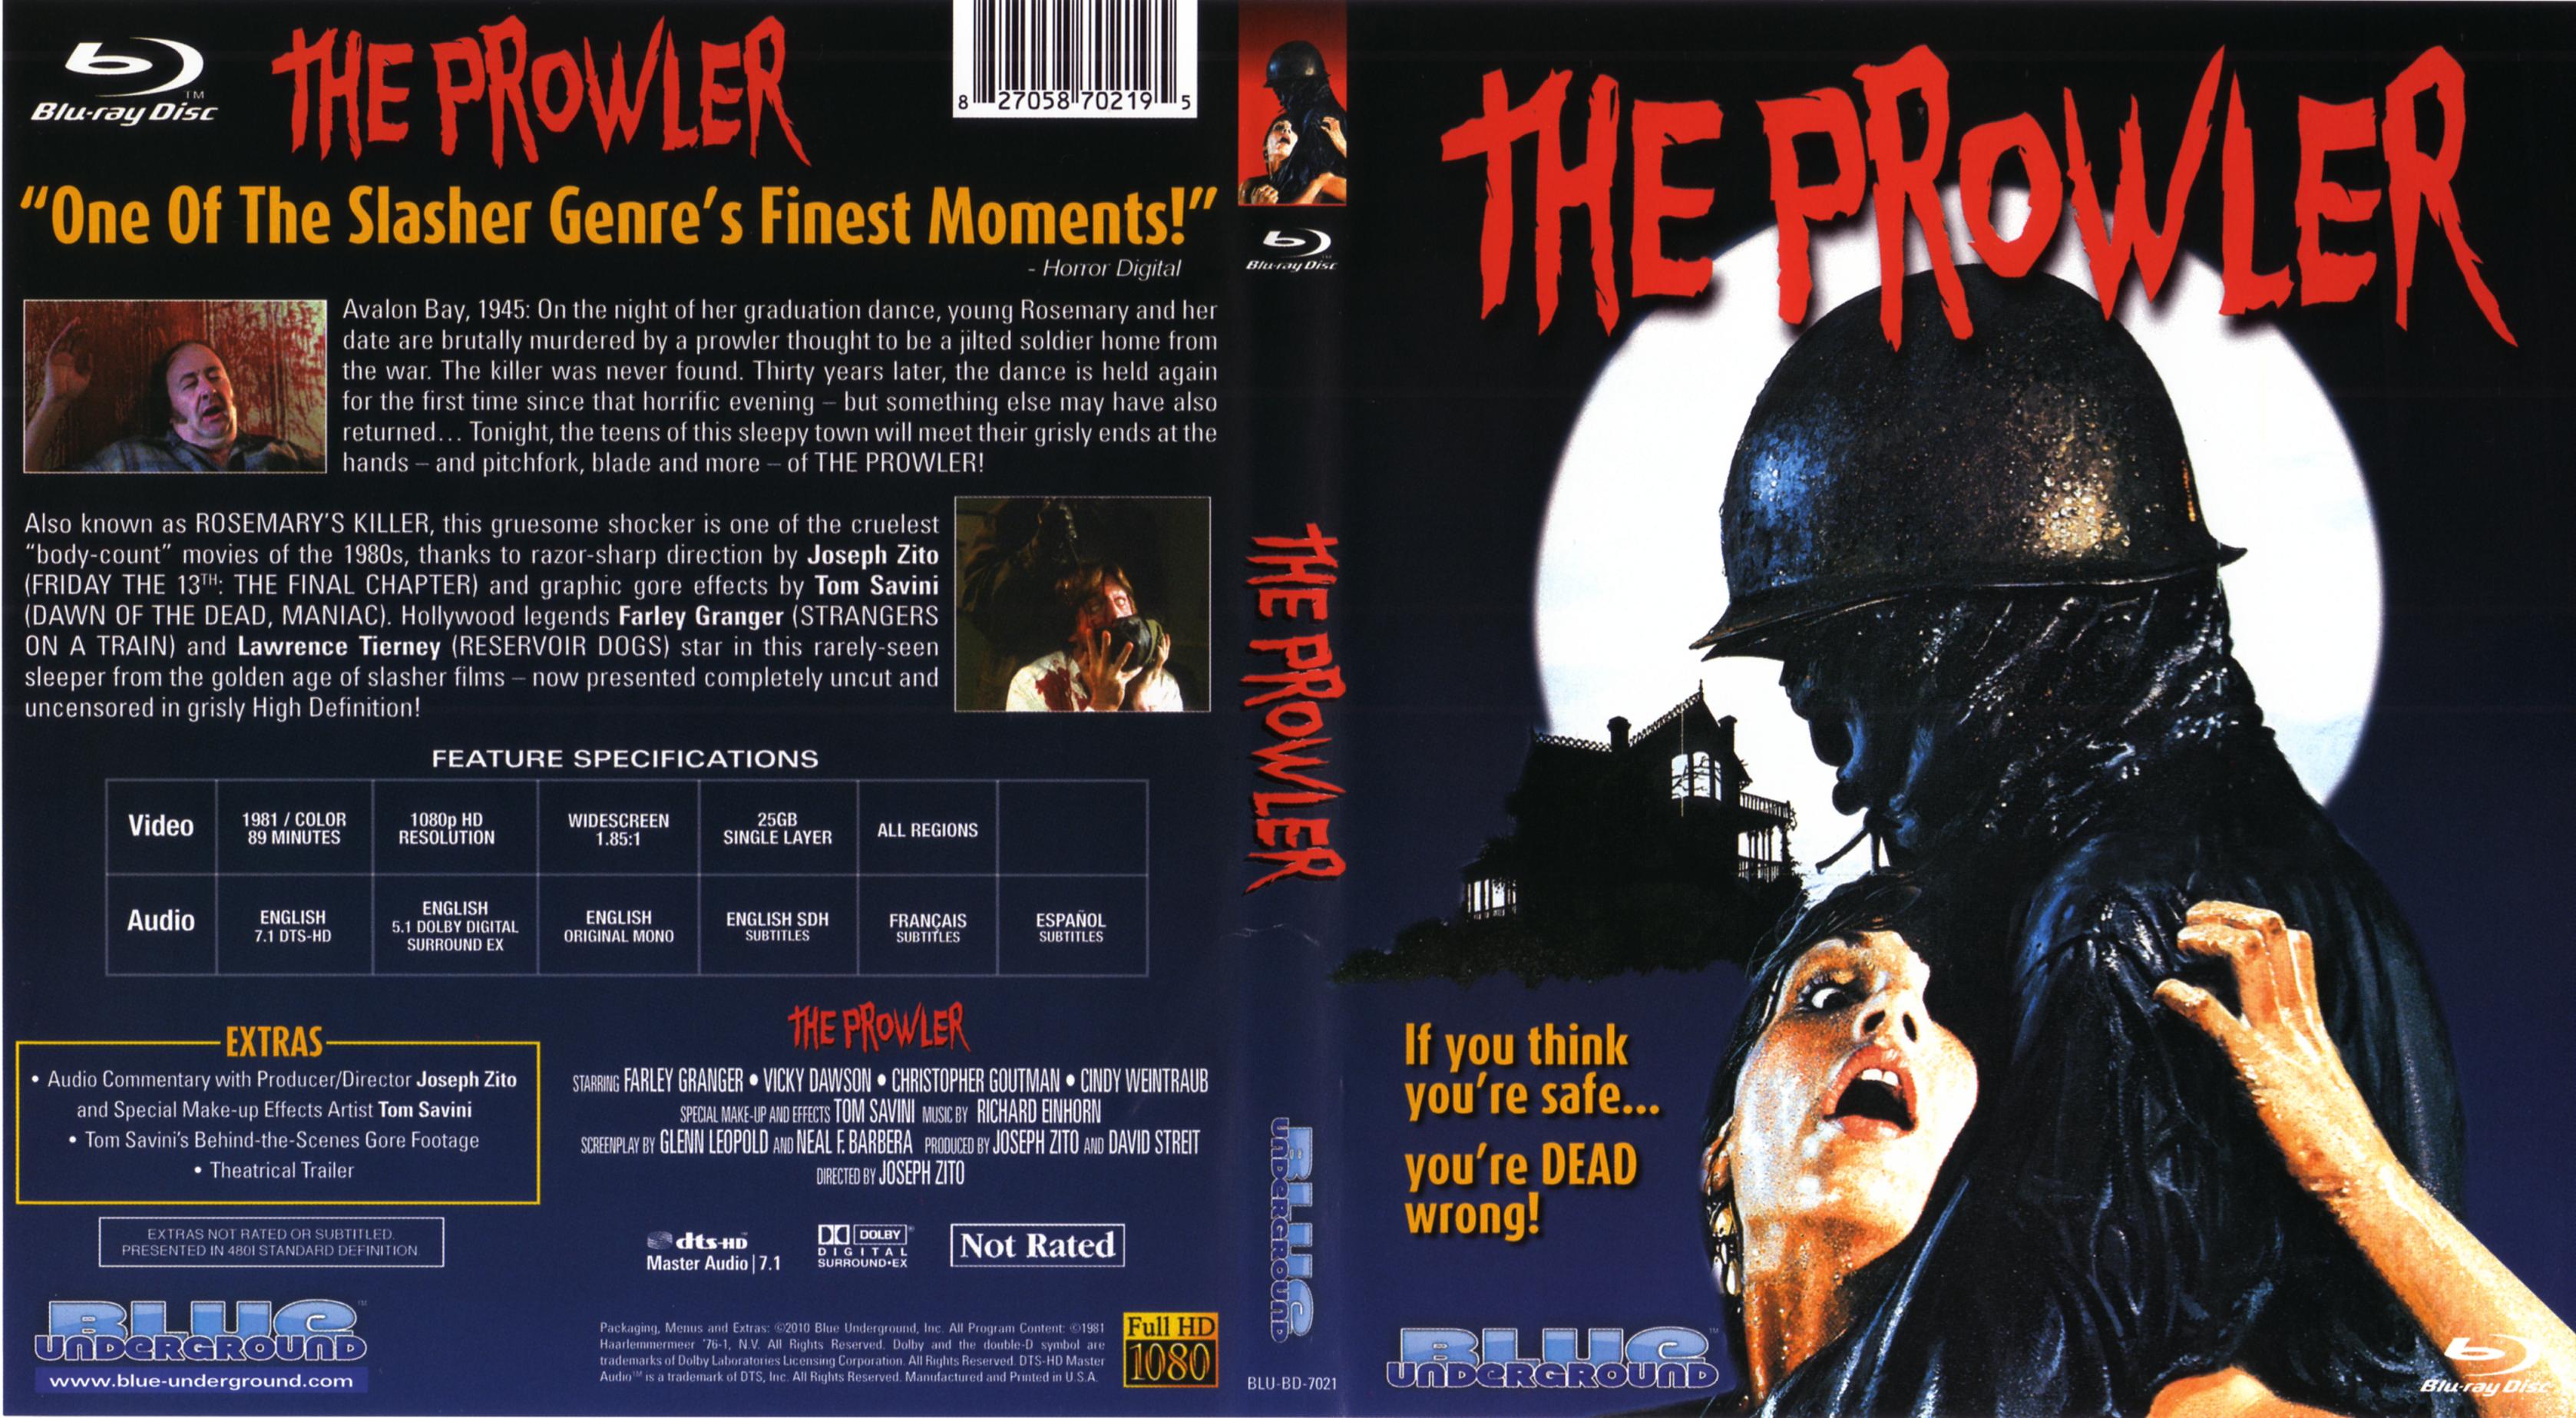 Jaquette DVD The Prowler (BLU-RAY) Zone 1